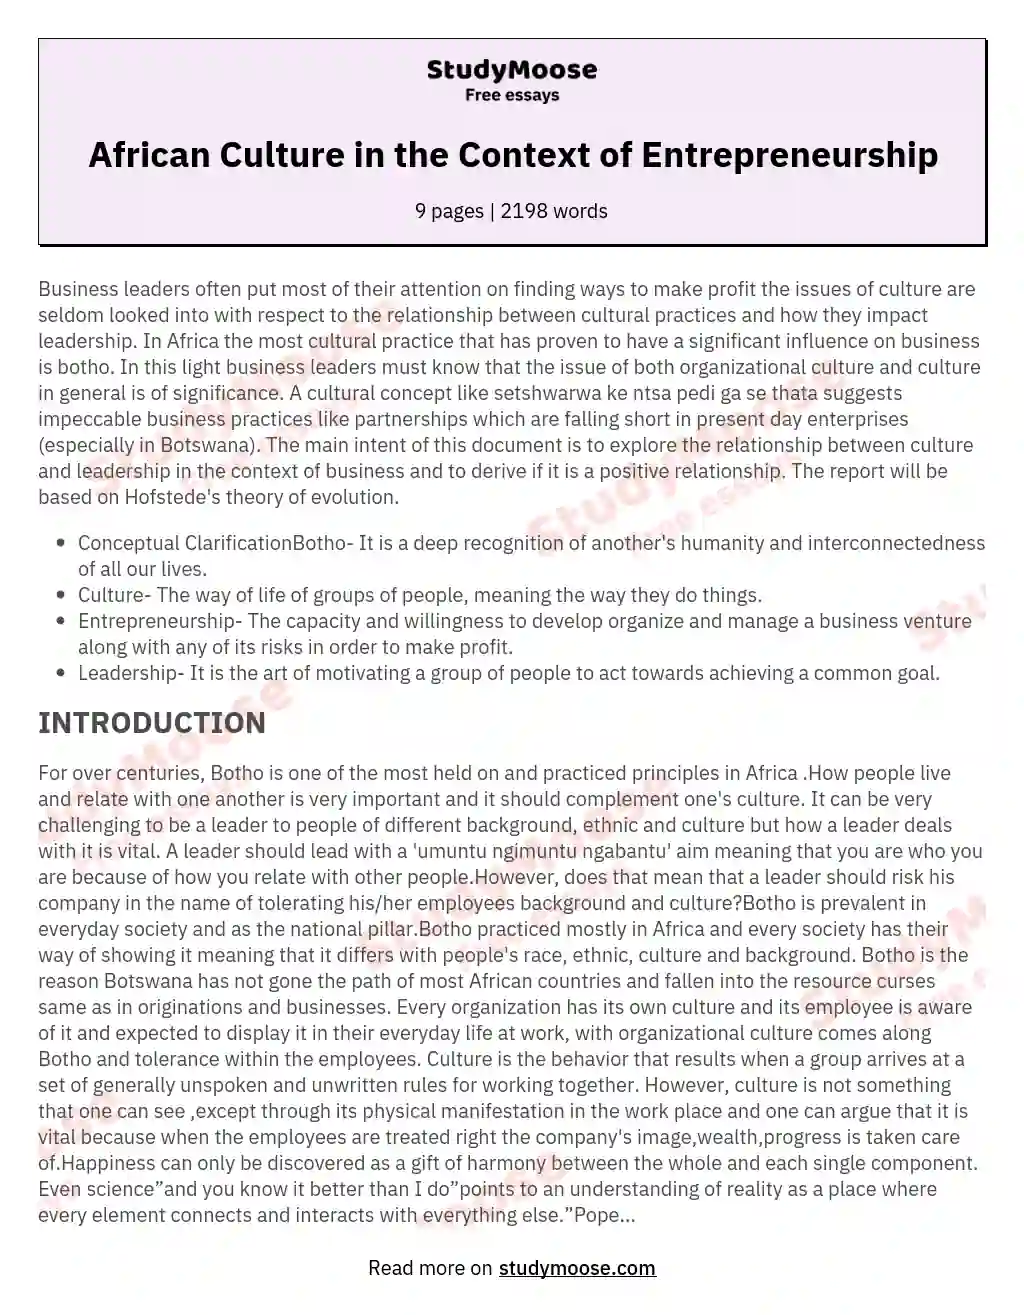 African Culture in the Context of Entrepreneurship essay